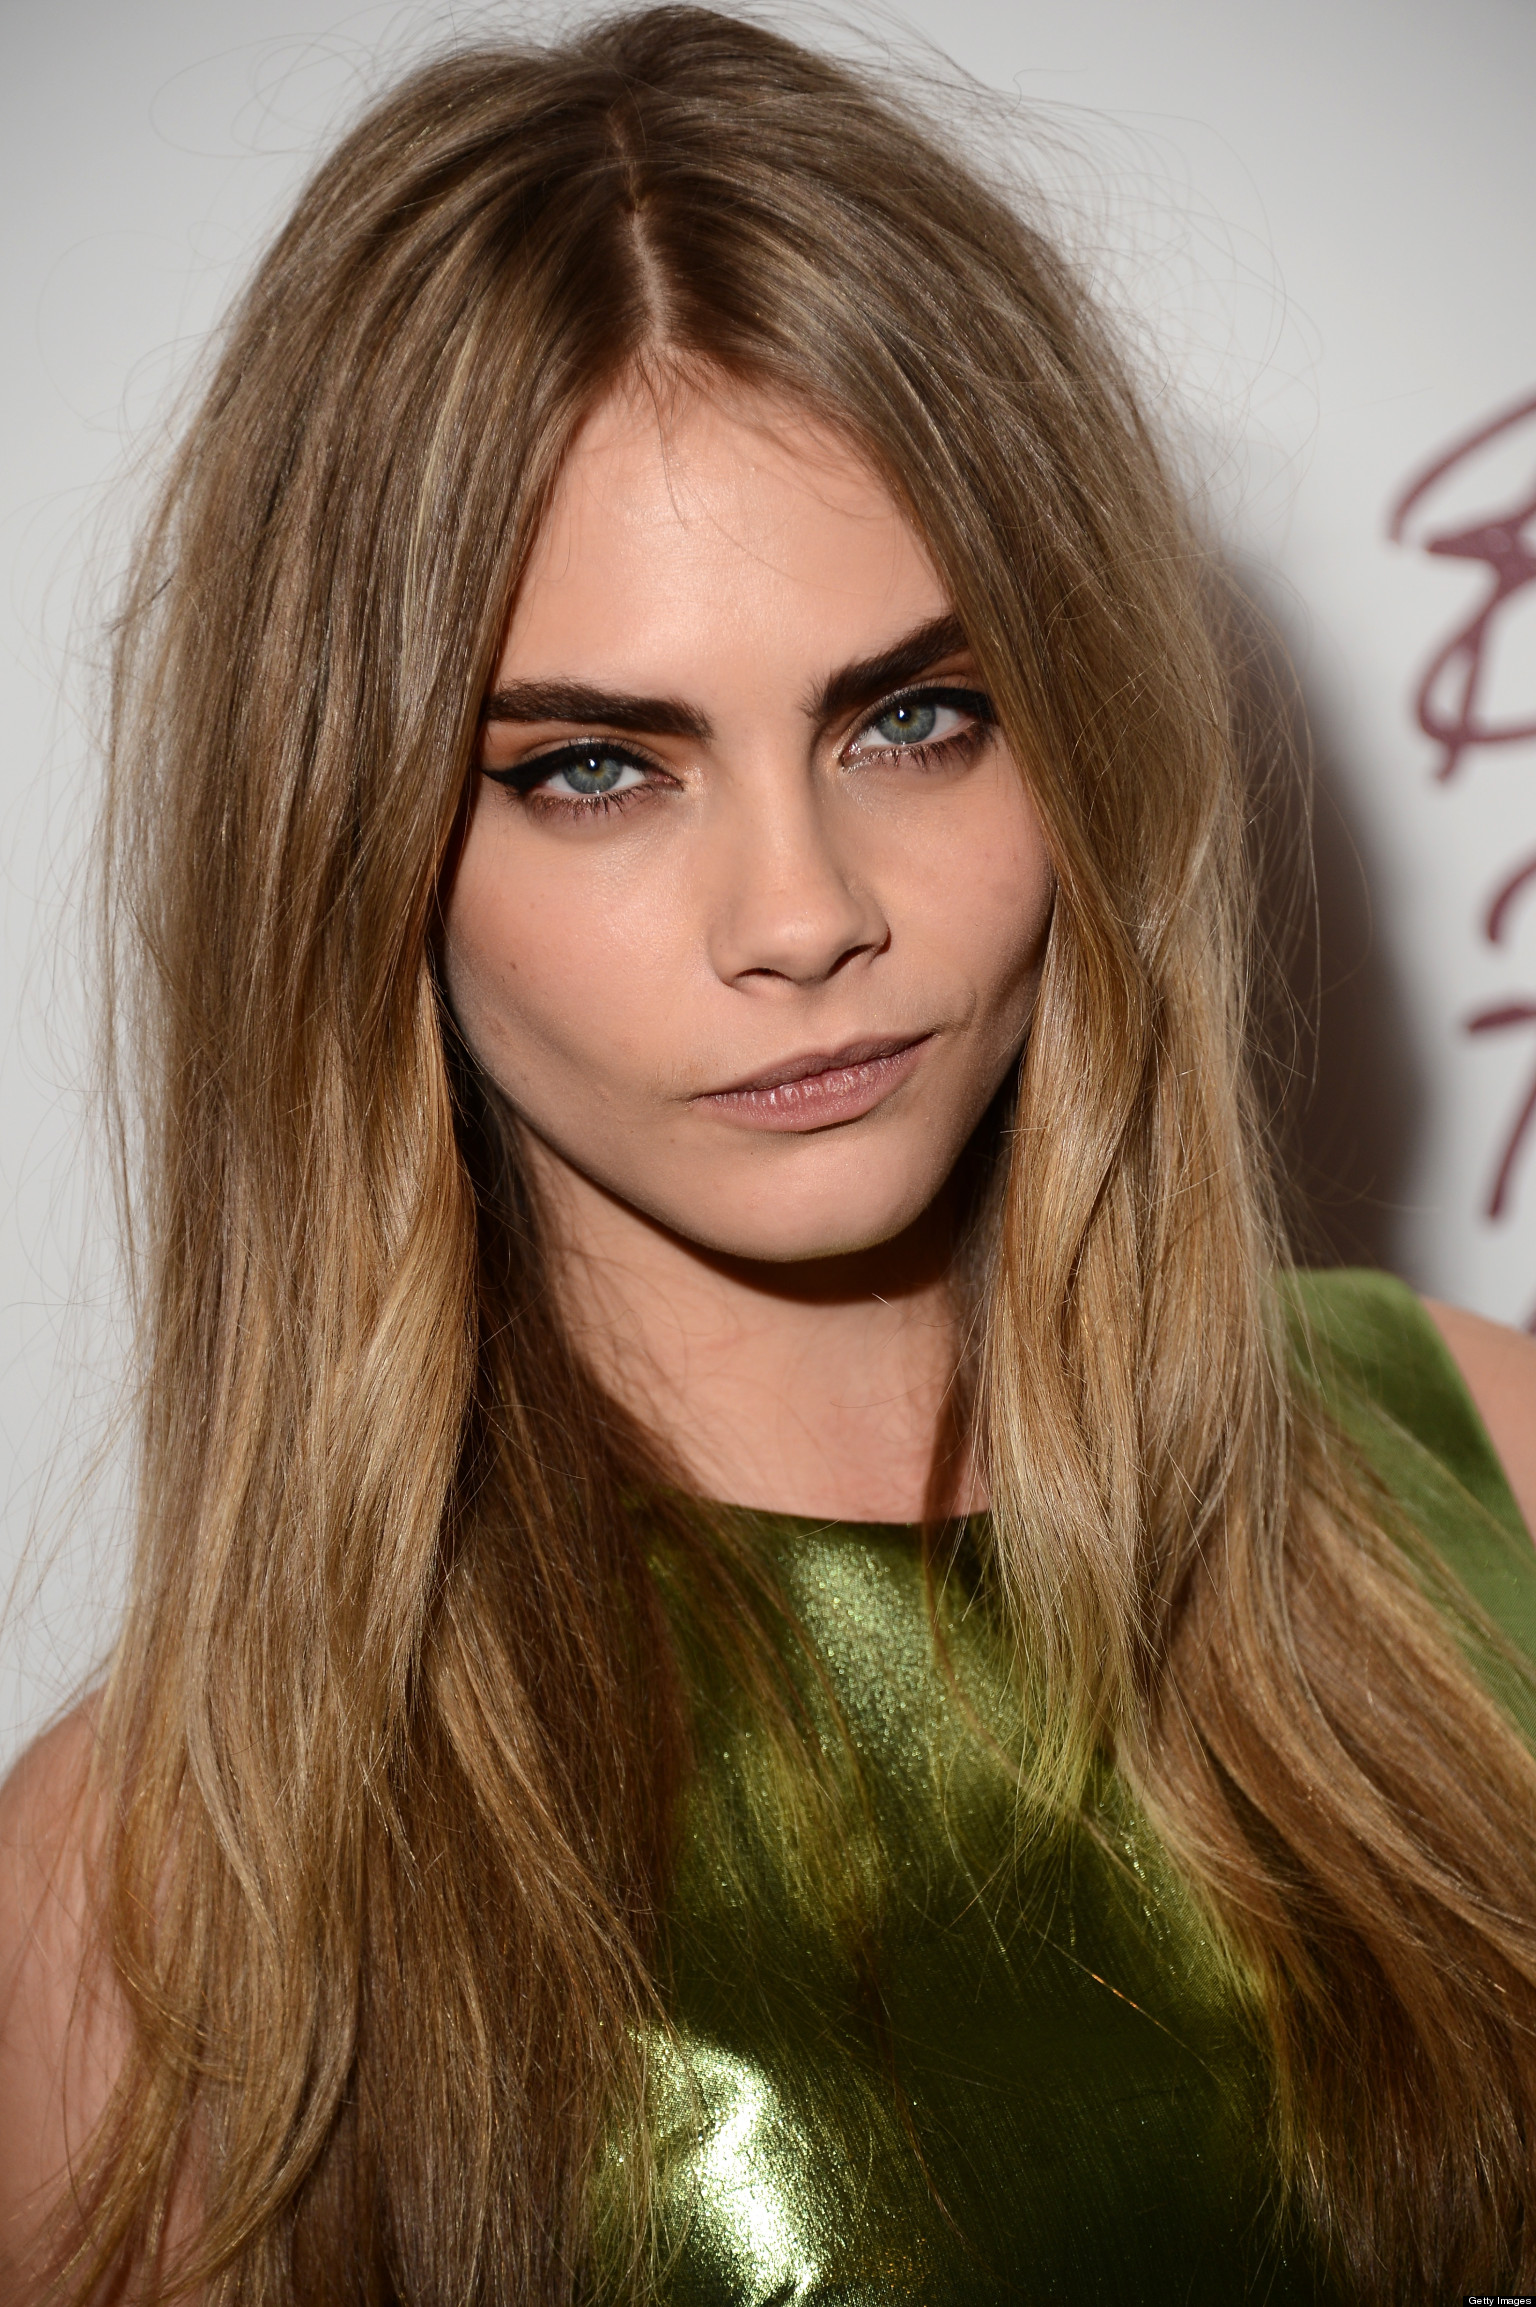 Latest Haircut Photos Cara Delevingne Latest Hairstyles